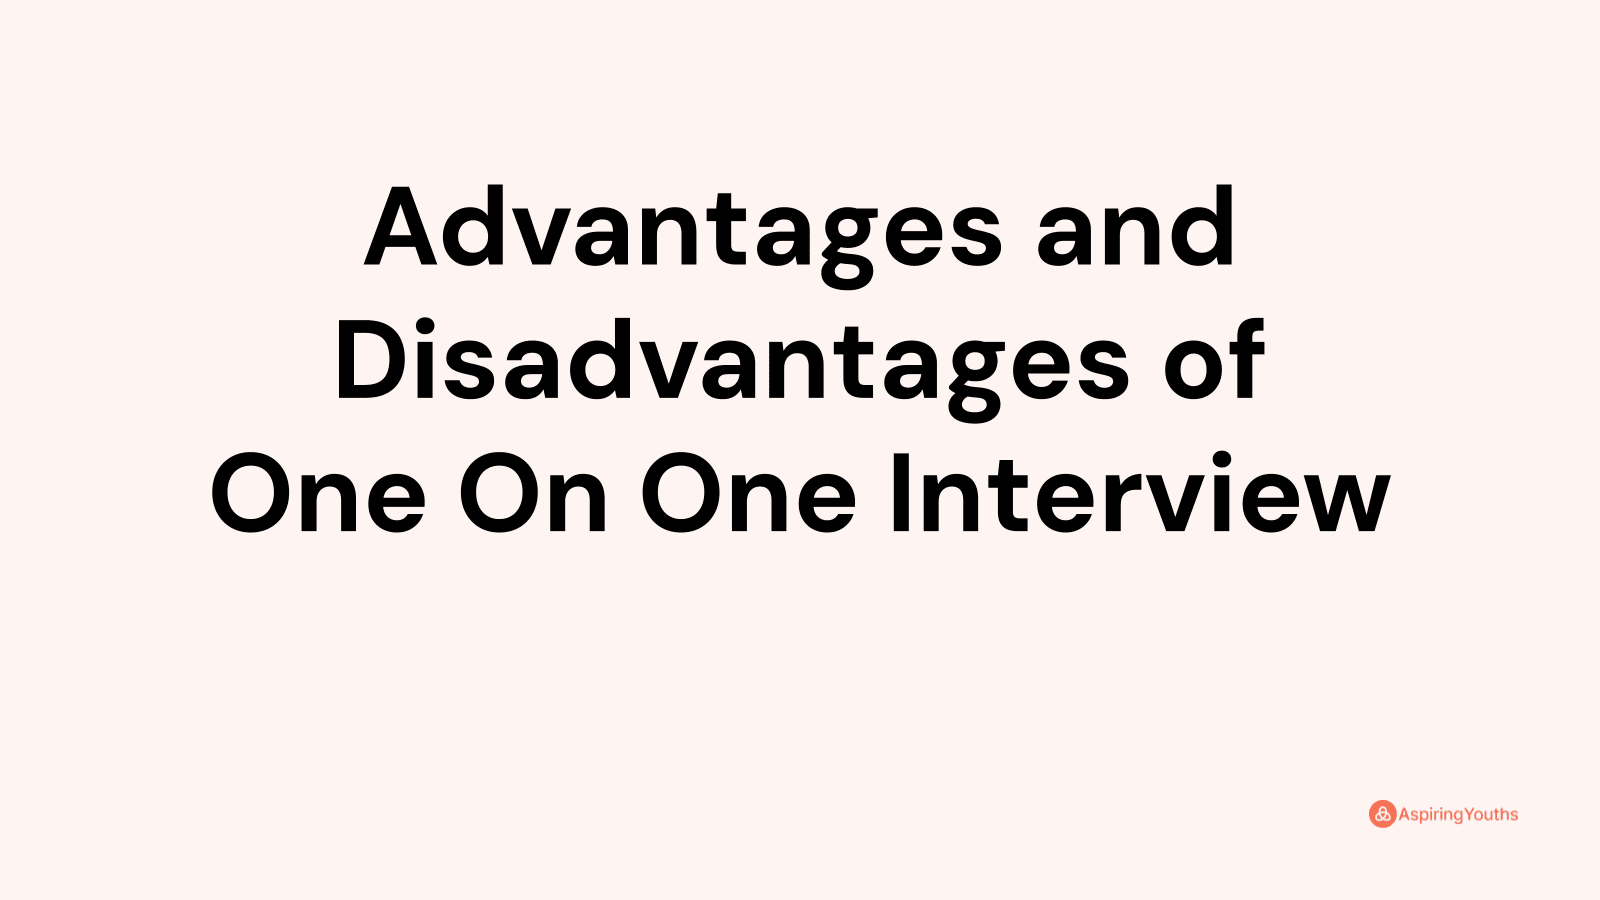 Advantages and disadvantages of One On One Interview